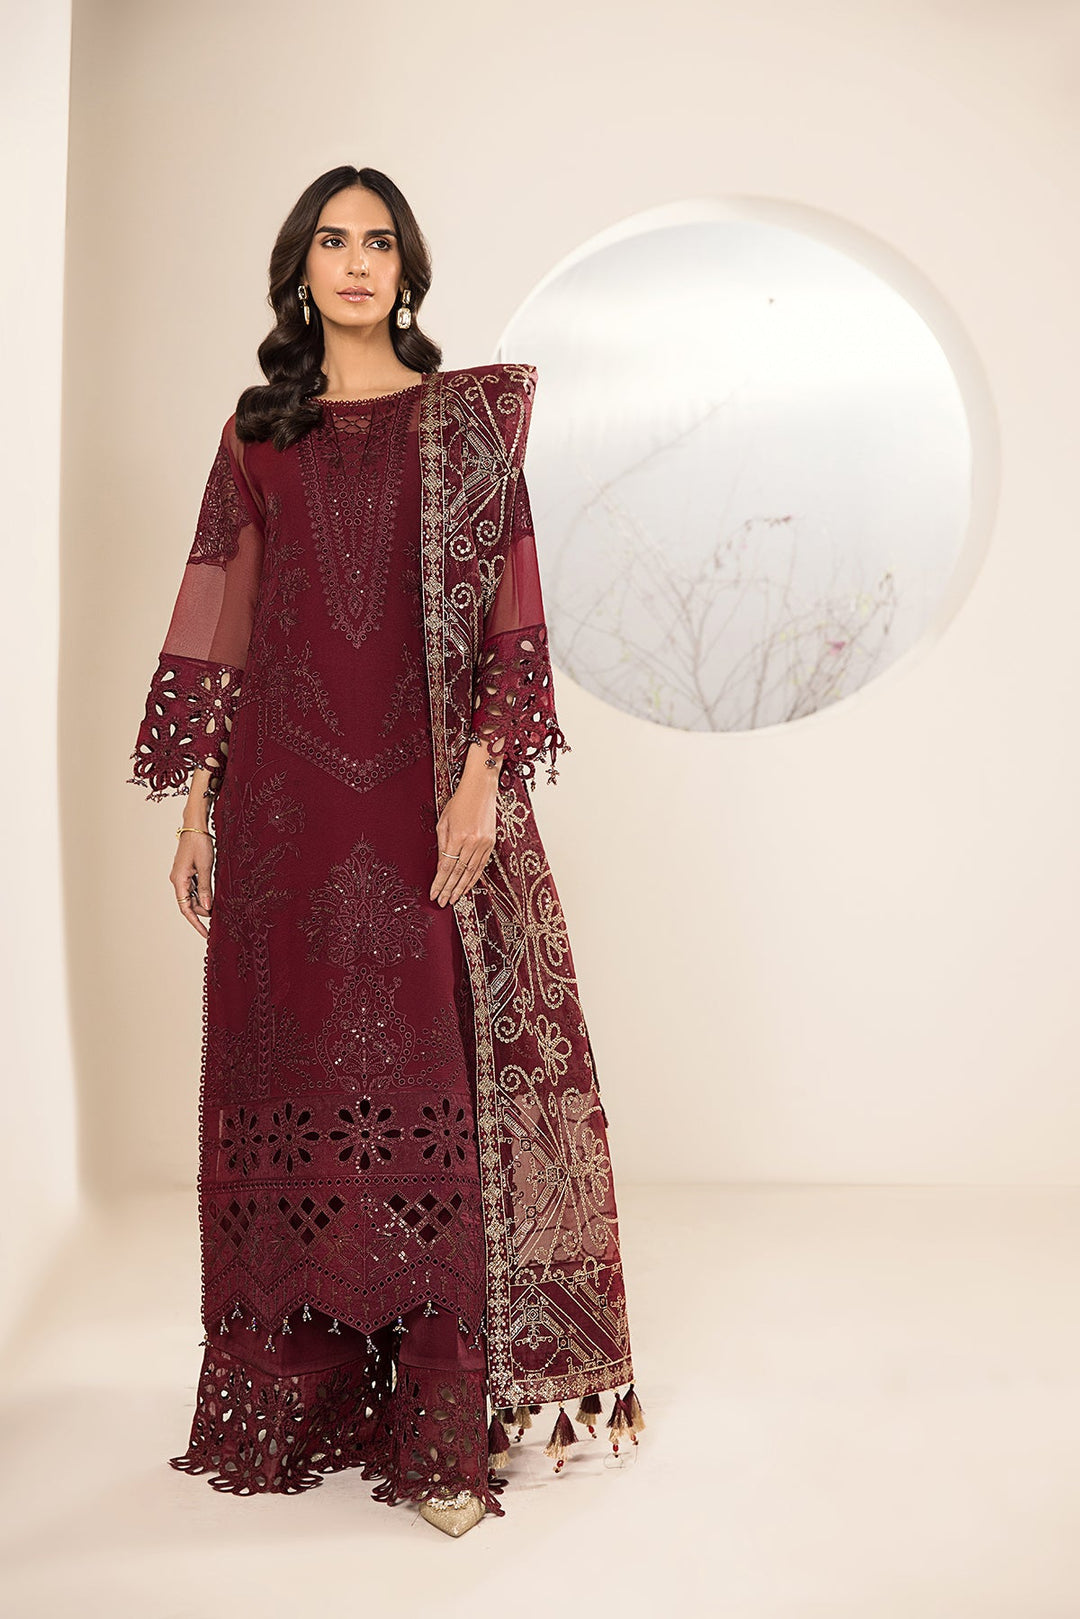 Buy Now Maroon Formal Suit - Alizeh - Lamhay Formals '23 - V15D01 - Raisa Online in USA, UK, Canada & Worldwide at Empress Clothing. 